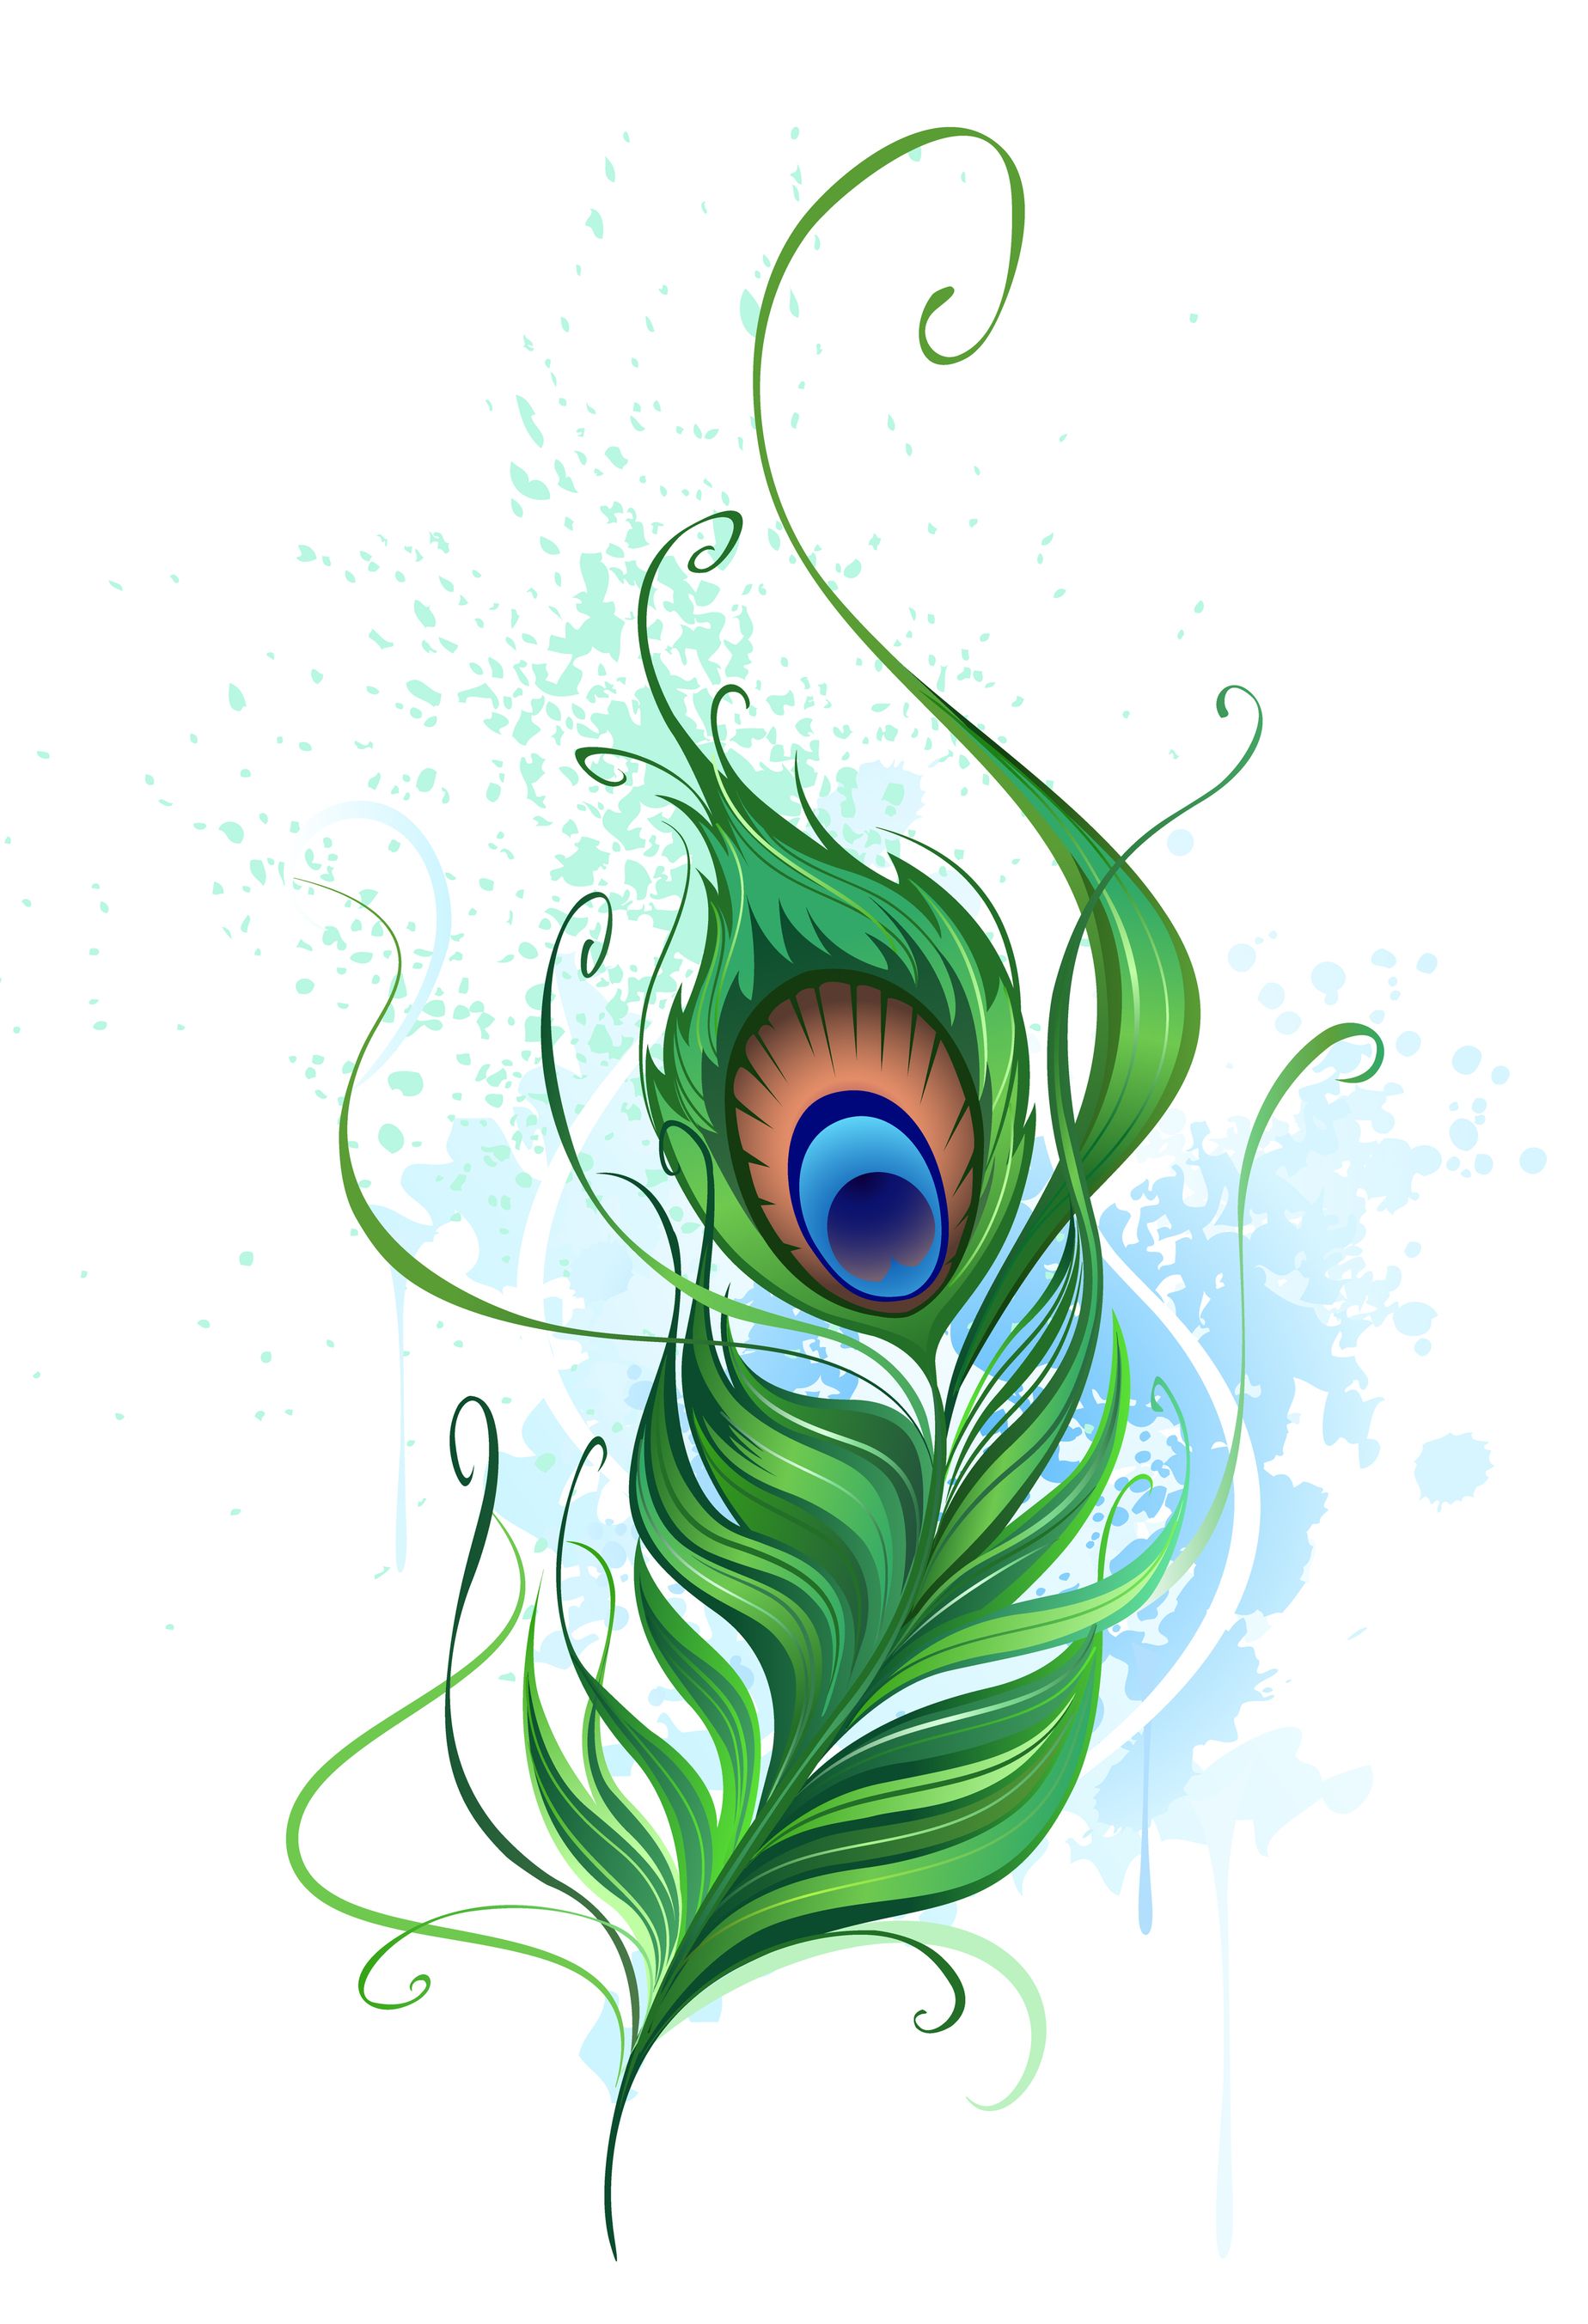 Peafowl Images Use These Free Images For Your Websites, - Plume De Paon Dessin - HD Wallpaper 